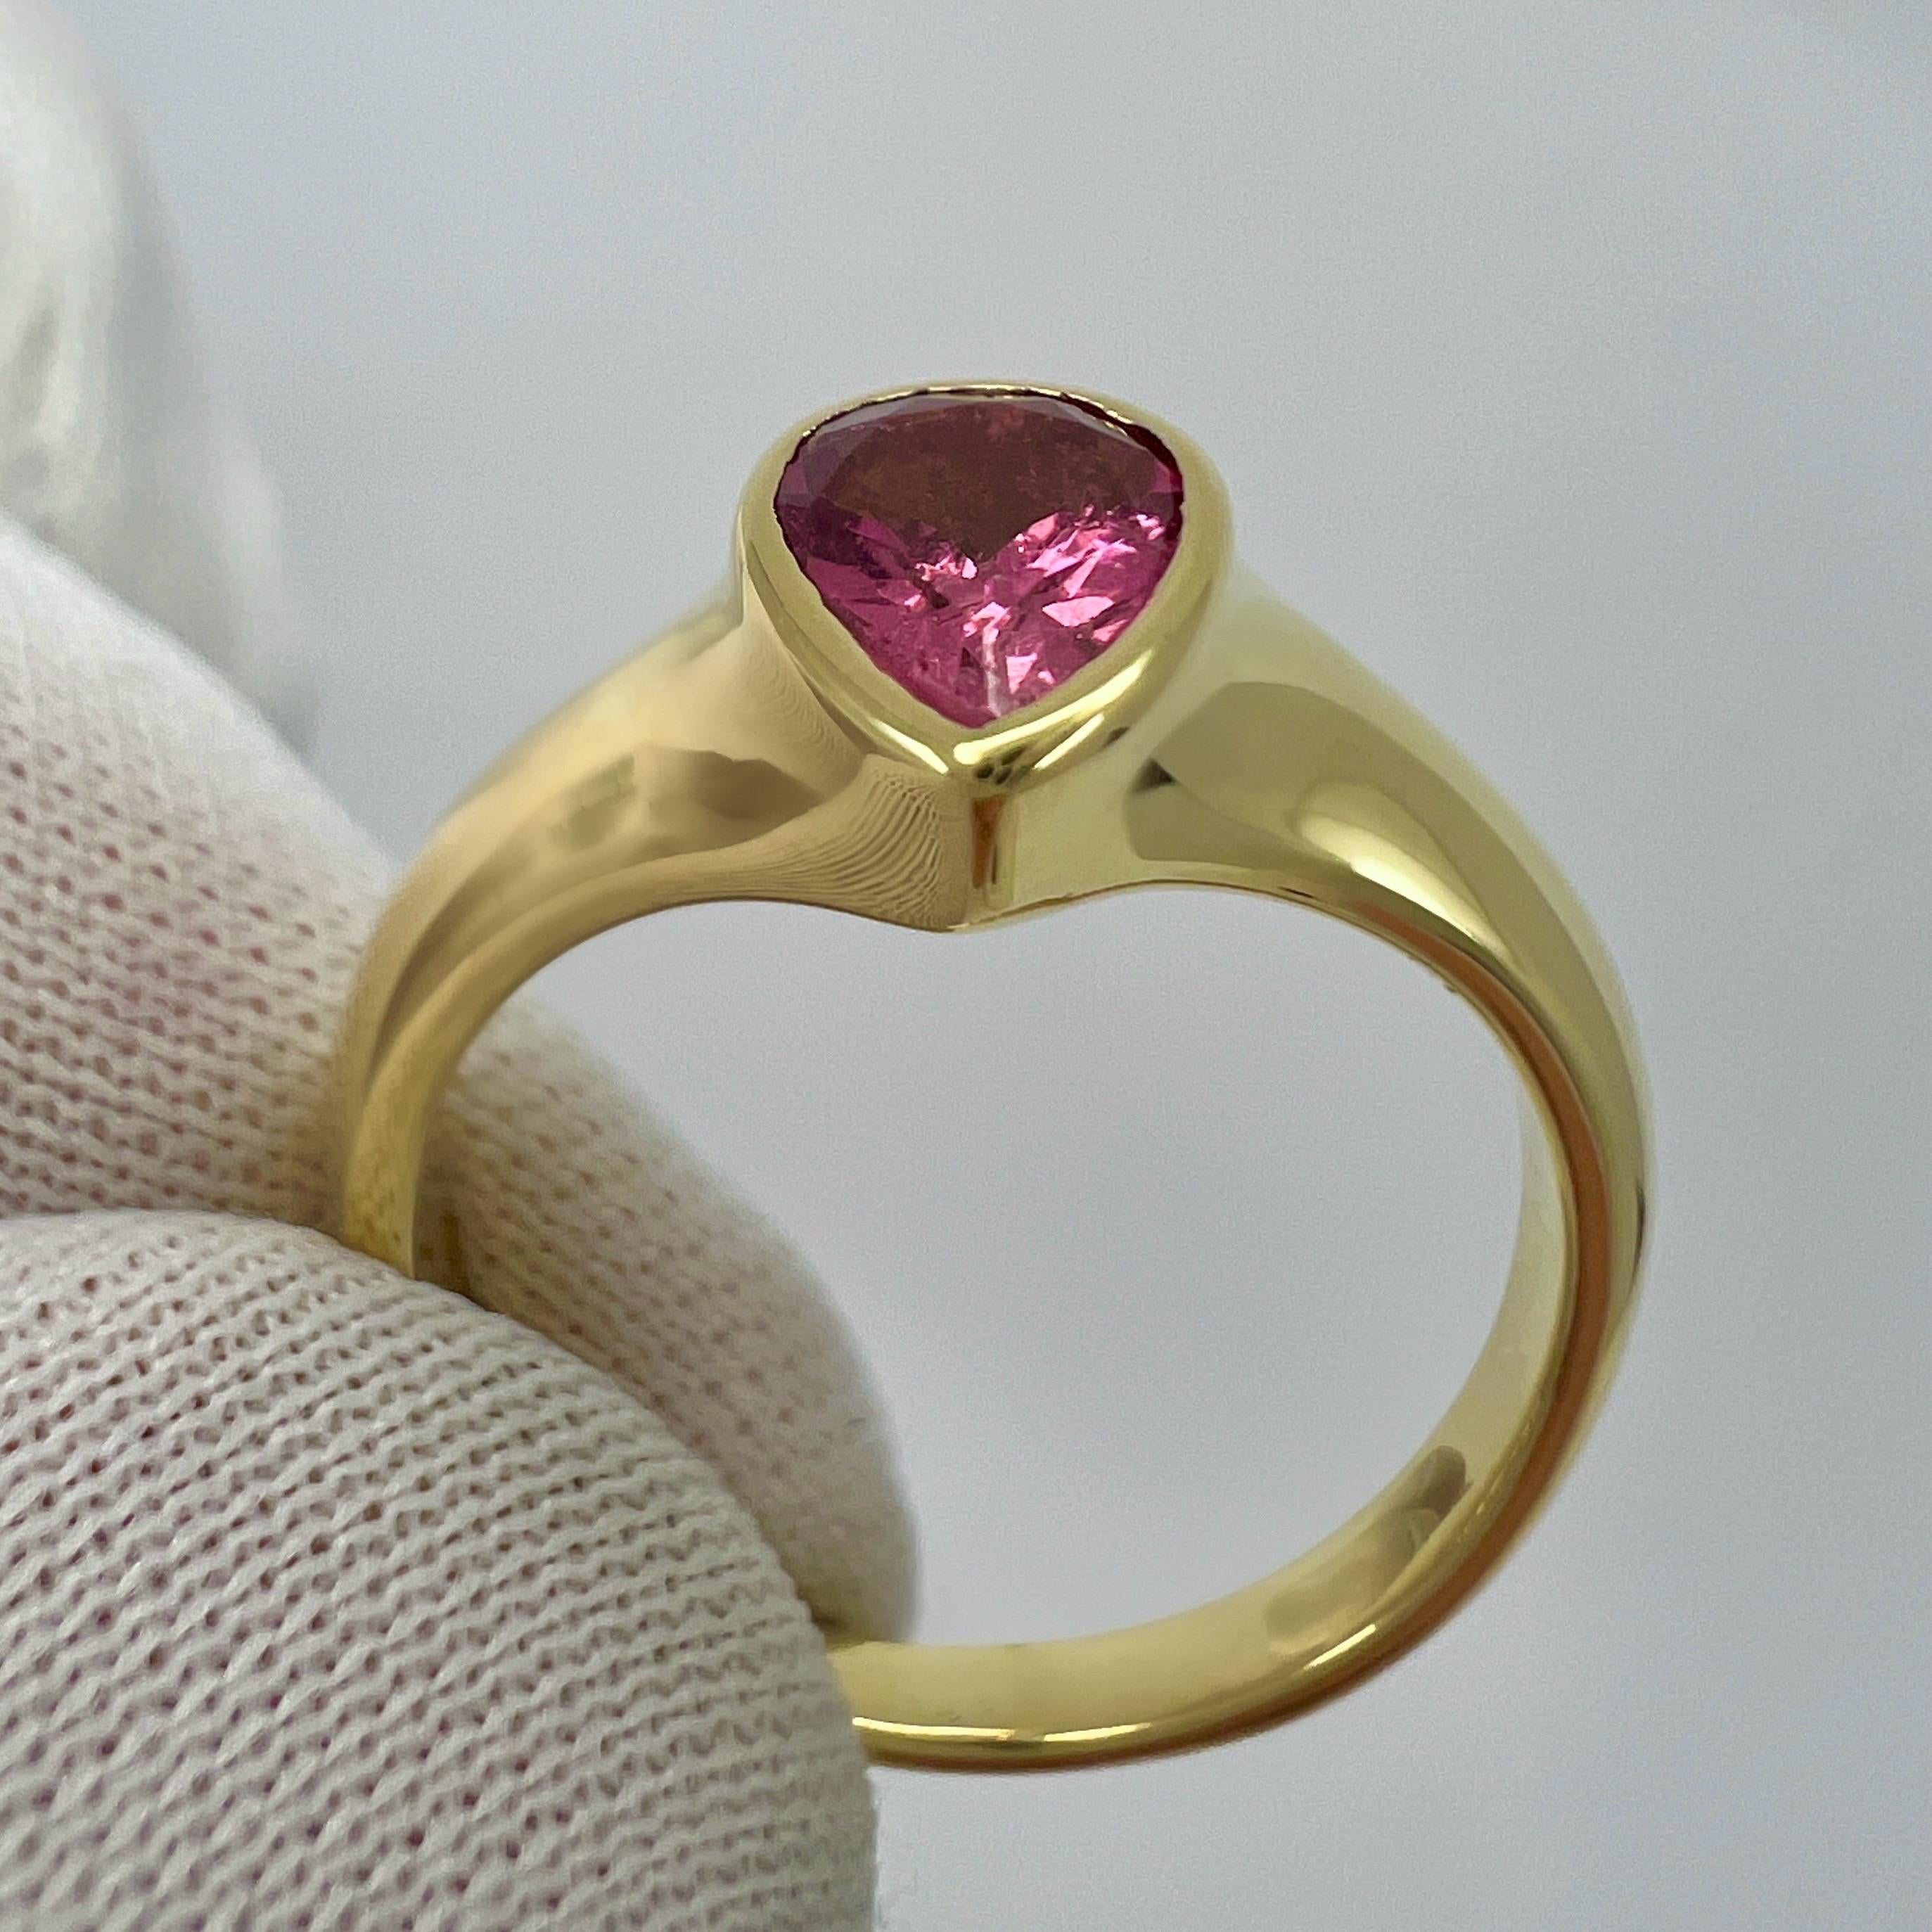 Rare Vintage Van Cleef & Arpels Pink Tourmaline Pear Cut 18k Yellow Gold Ring For Sale 7